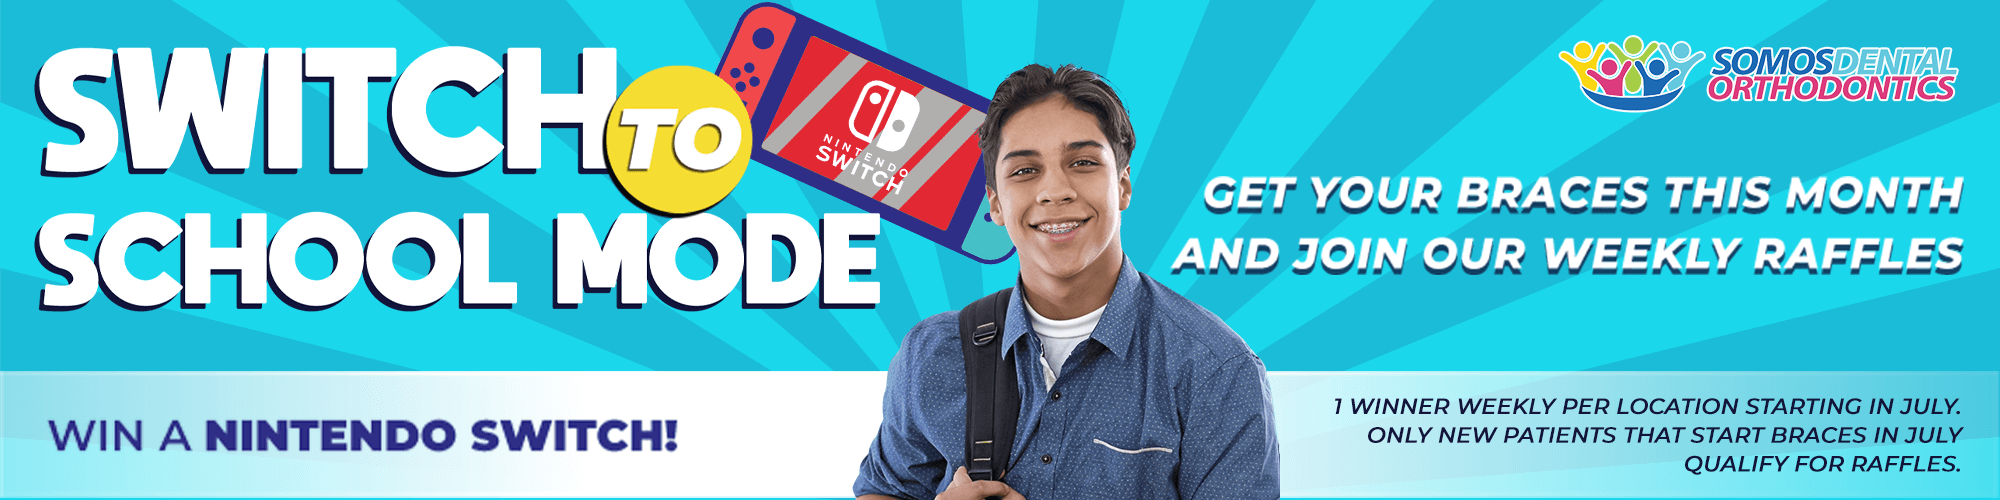 Banner to promote a raffle to win a nintendo switch at somos dental